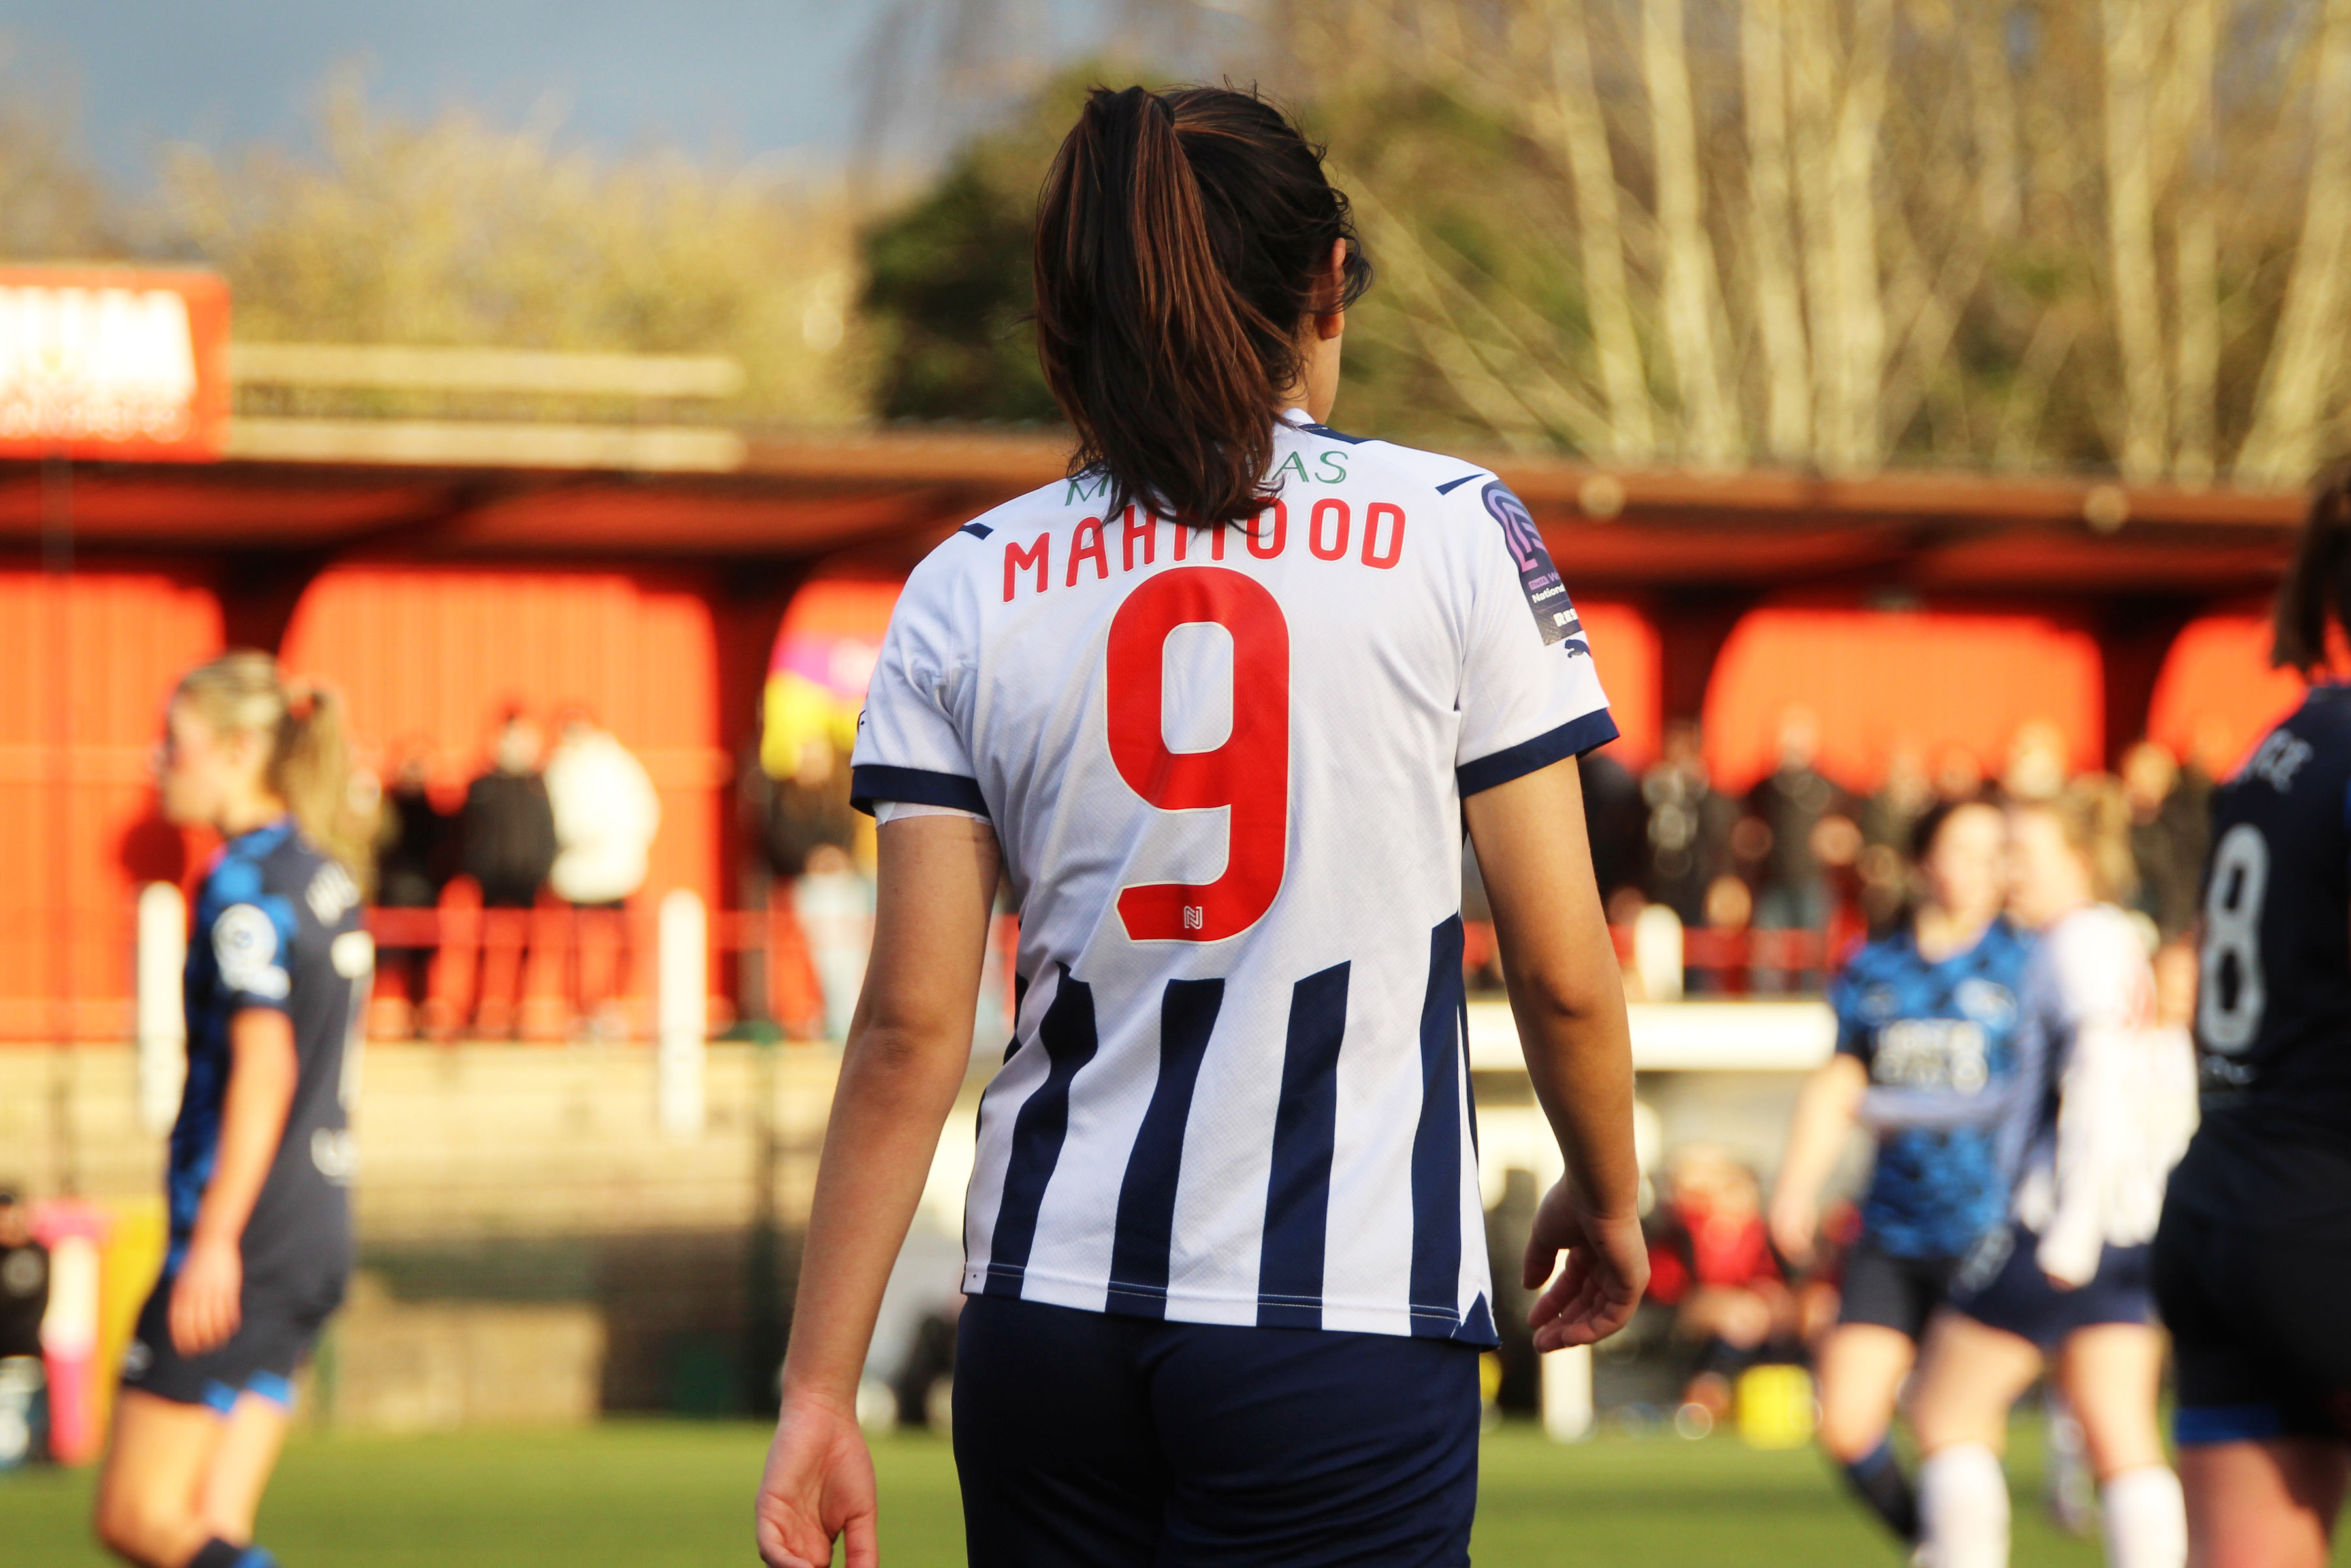 Mariam Mahmood in action for Albion Women.